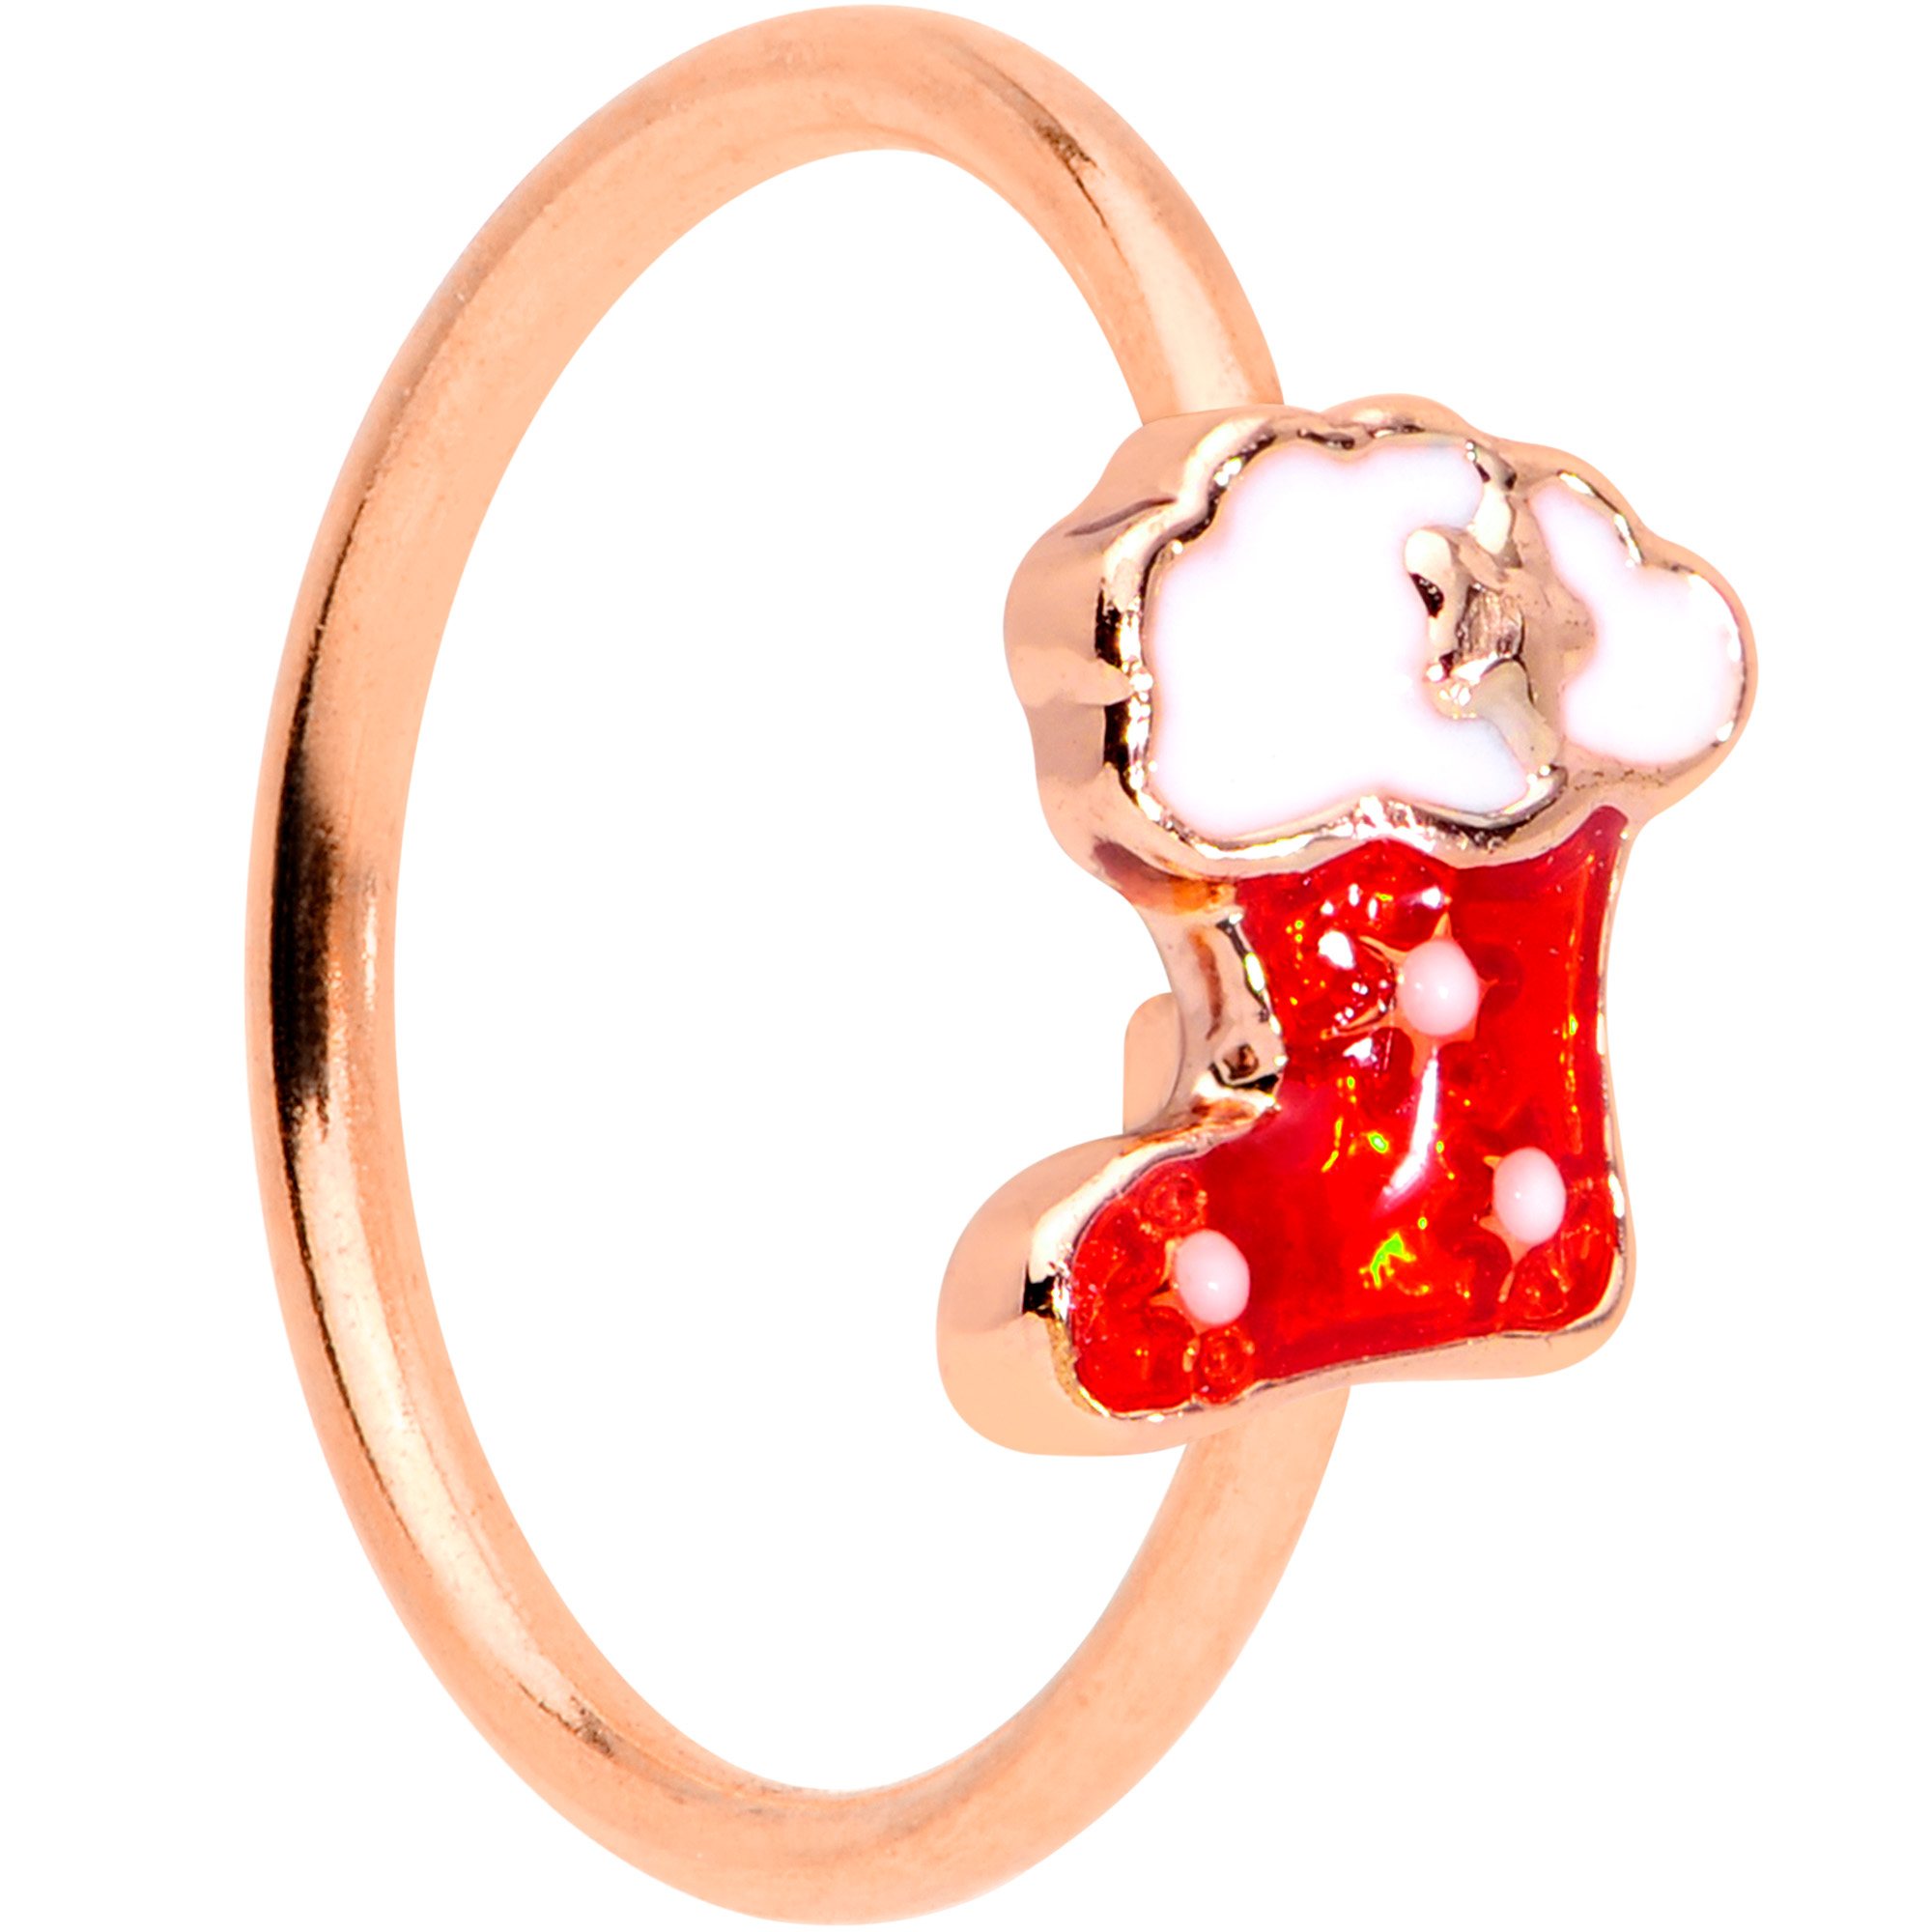 Body Candy Womens 20G PVD 316L Steel Nose Ring Rosy Red Stocking Nose Hoop Ring Circular Nose Ring 5/16” - image 1 of 3